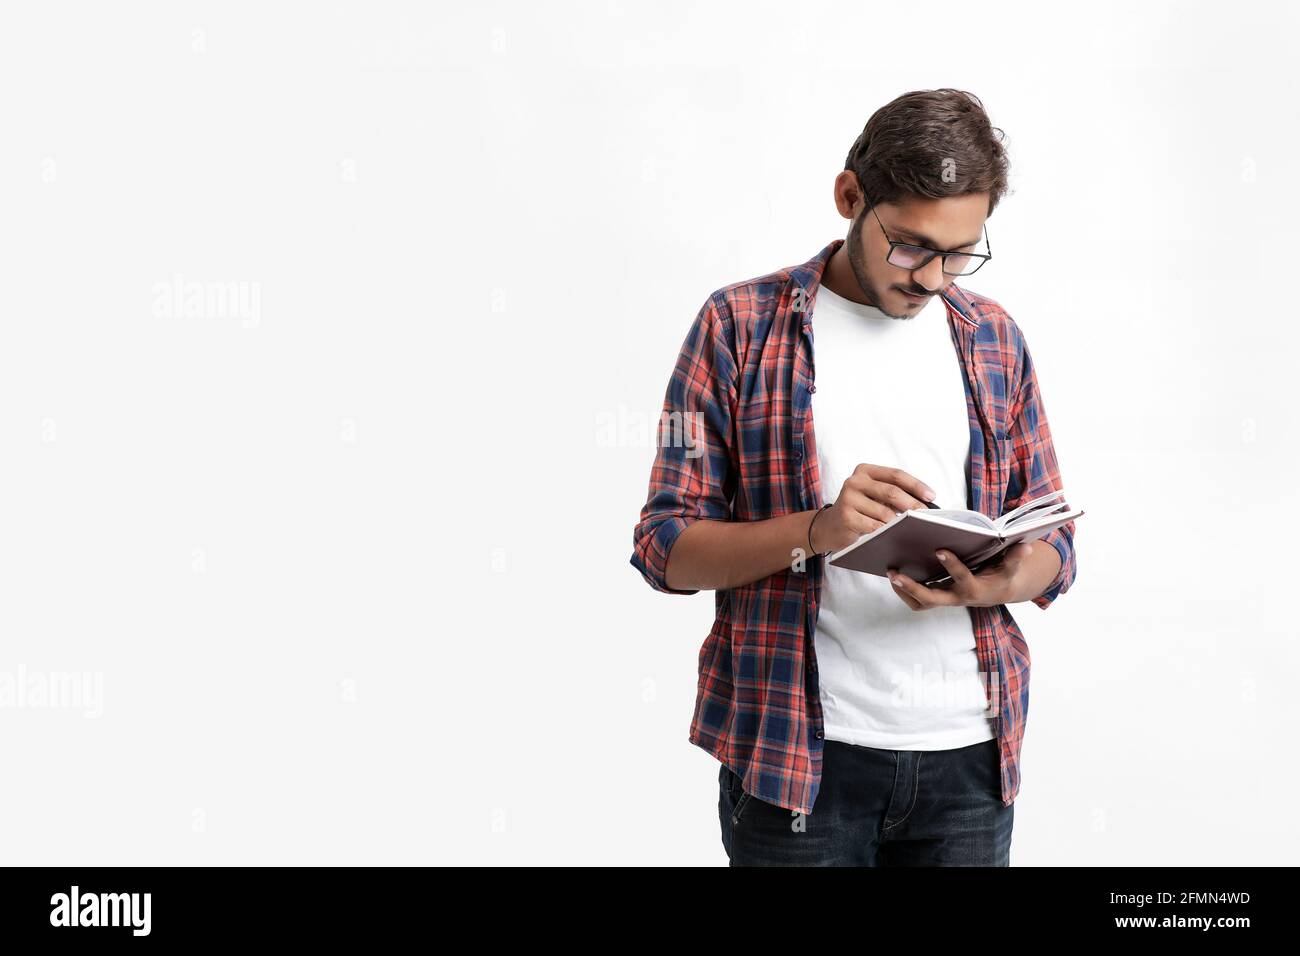 Indian college student reading book on white background. Stock Photo